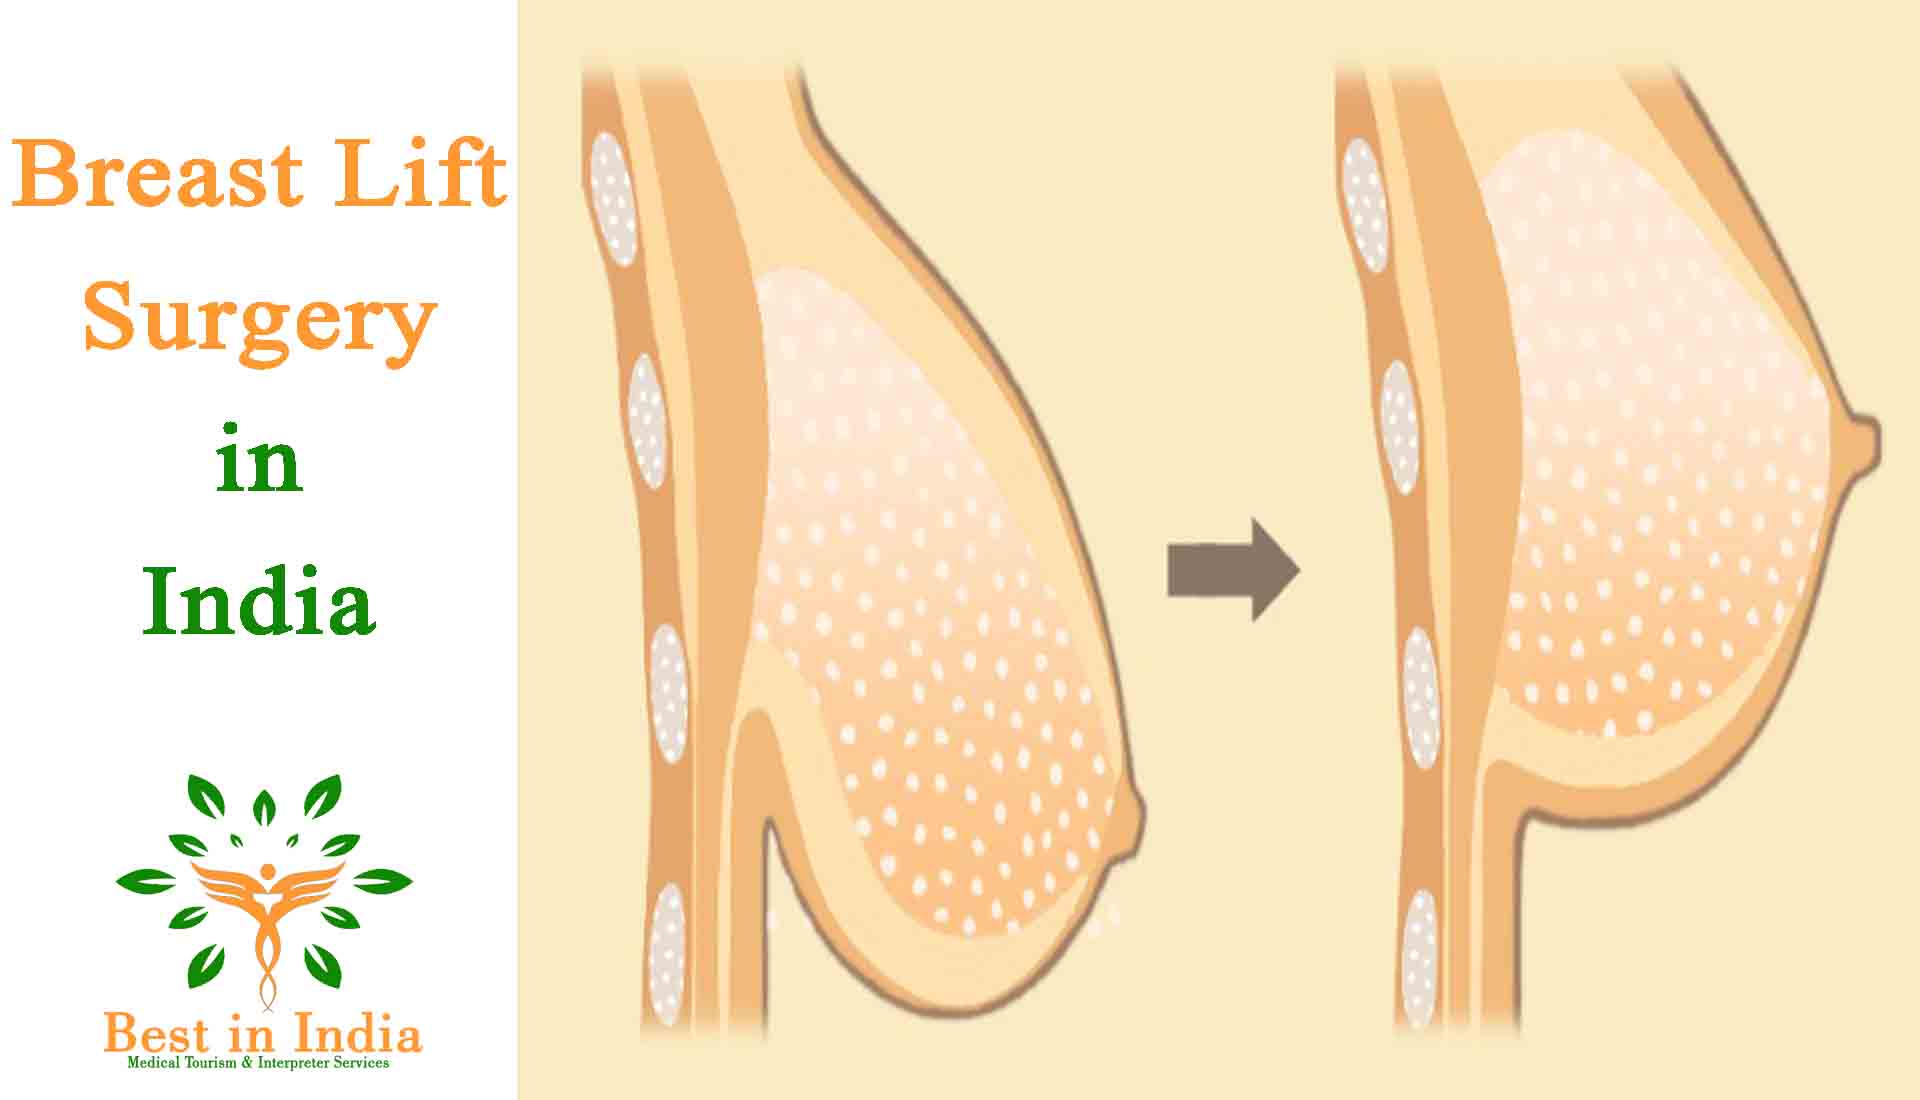 Breast lift surgery at low cost in India